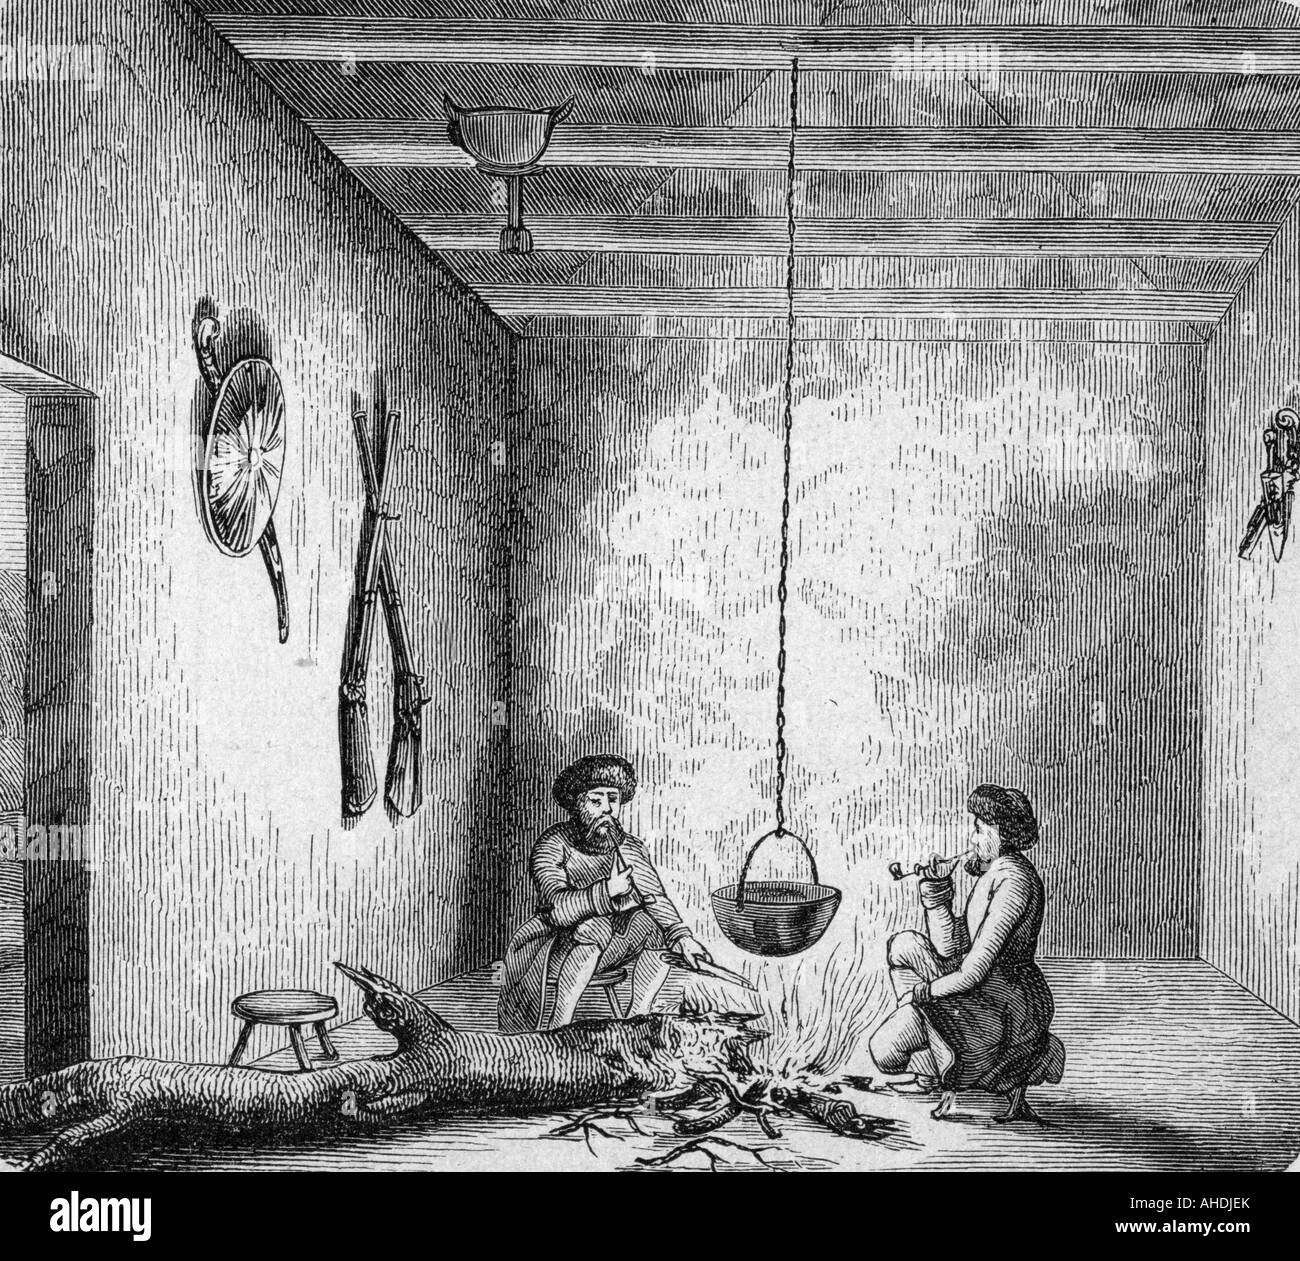 geografie/travel, Russia, people, Adyge in their home, engraving, 19th century, Cherkes, cooking, fire, pot, Caucasus, Caucasians, historic, historical, Stock Photo